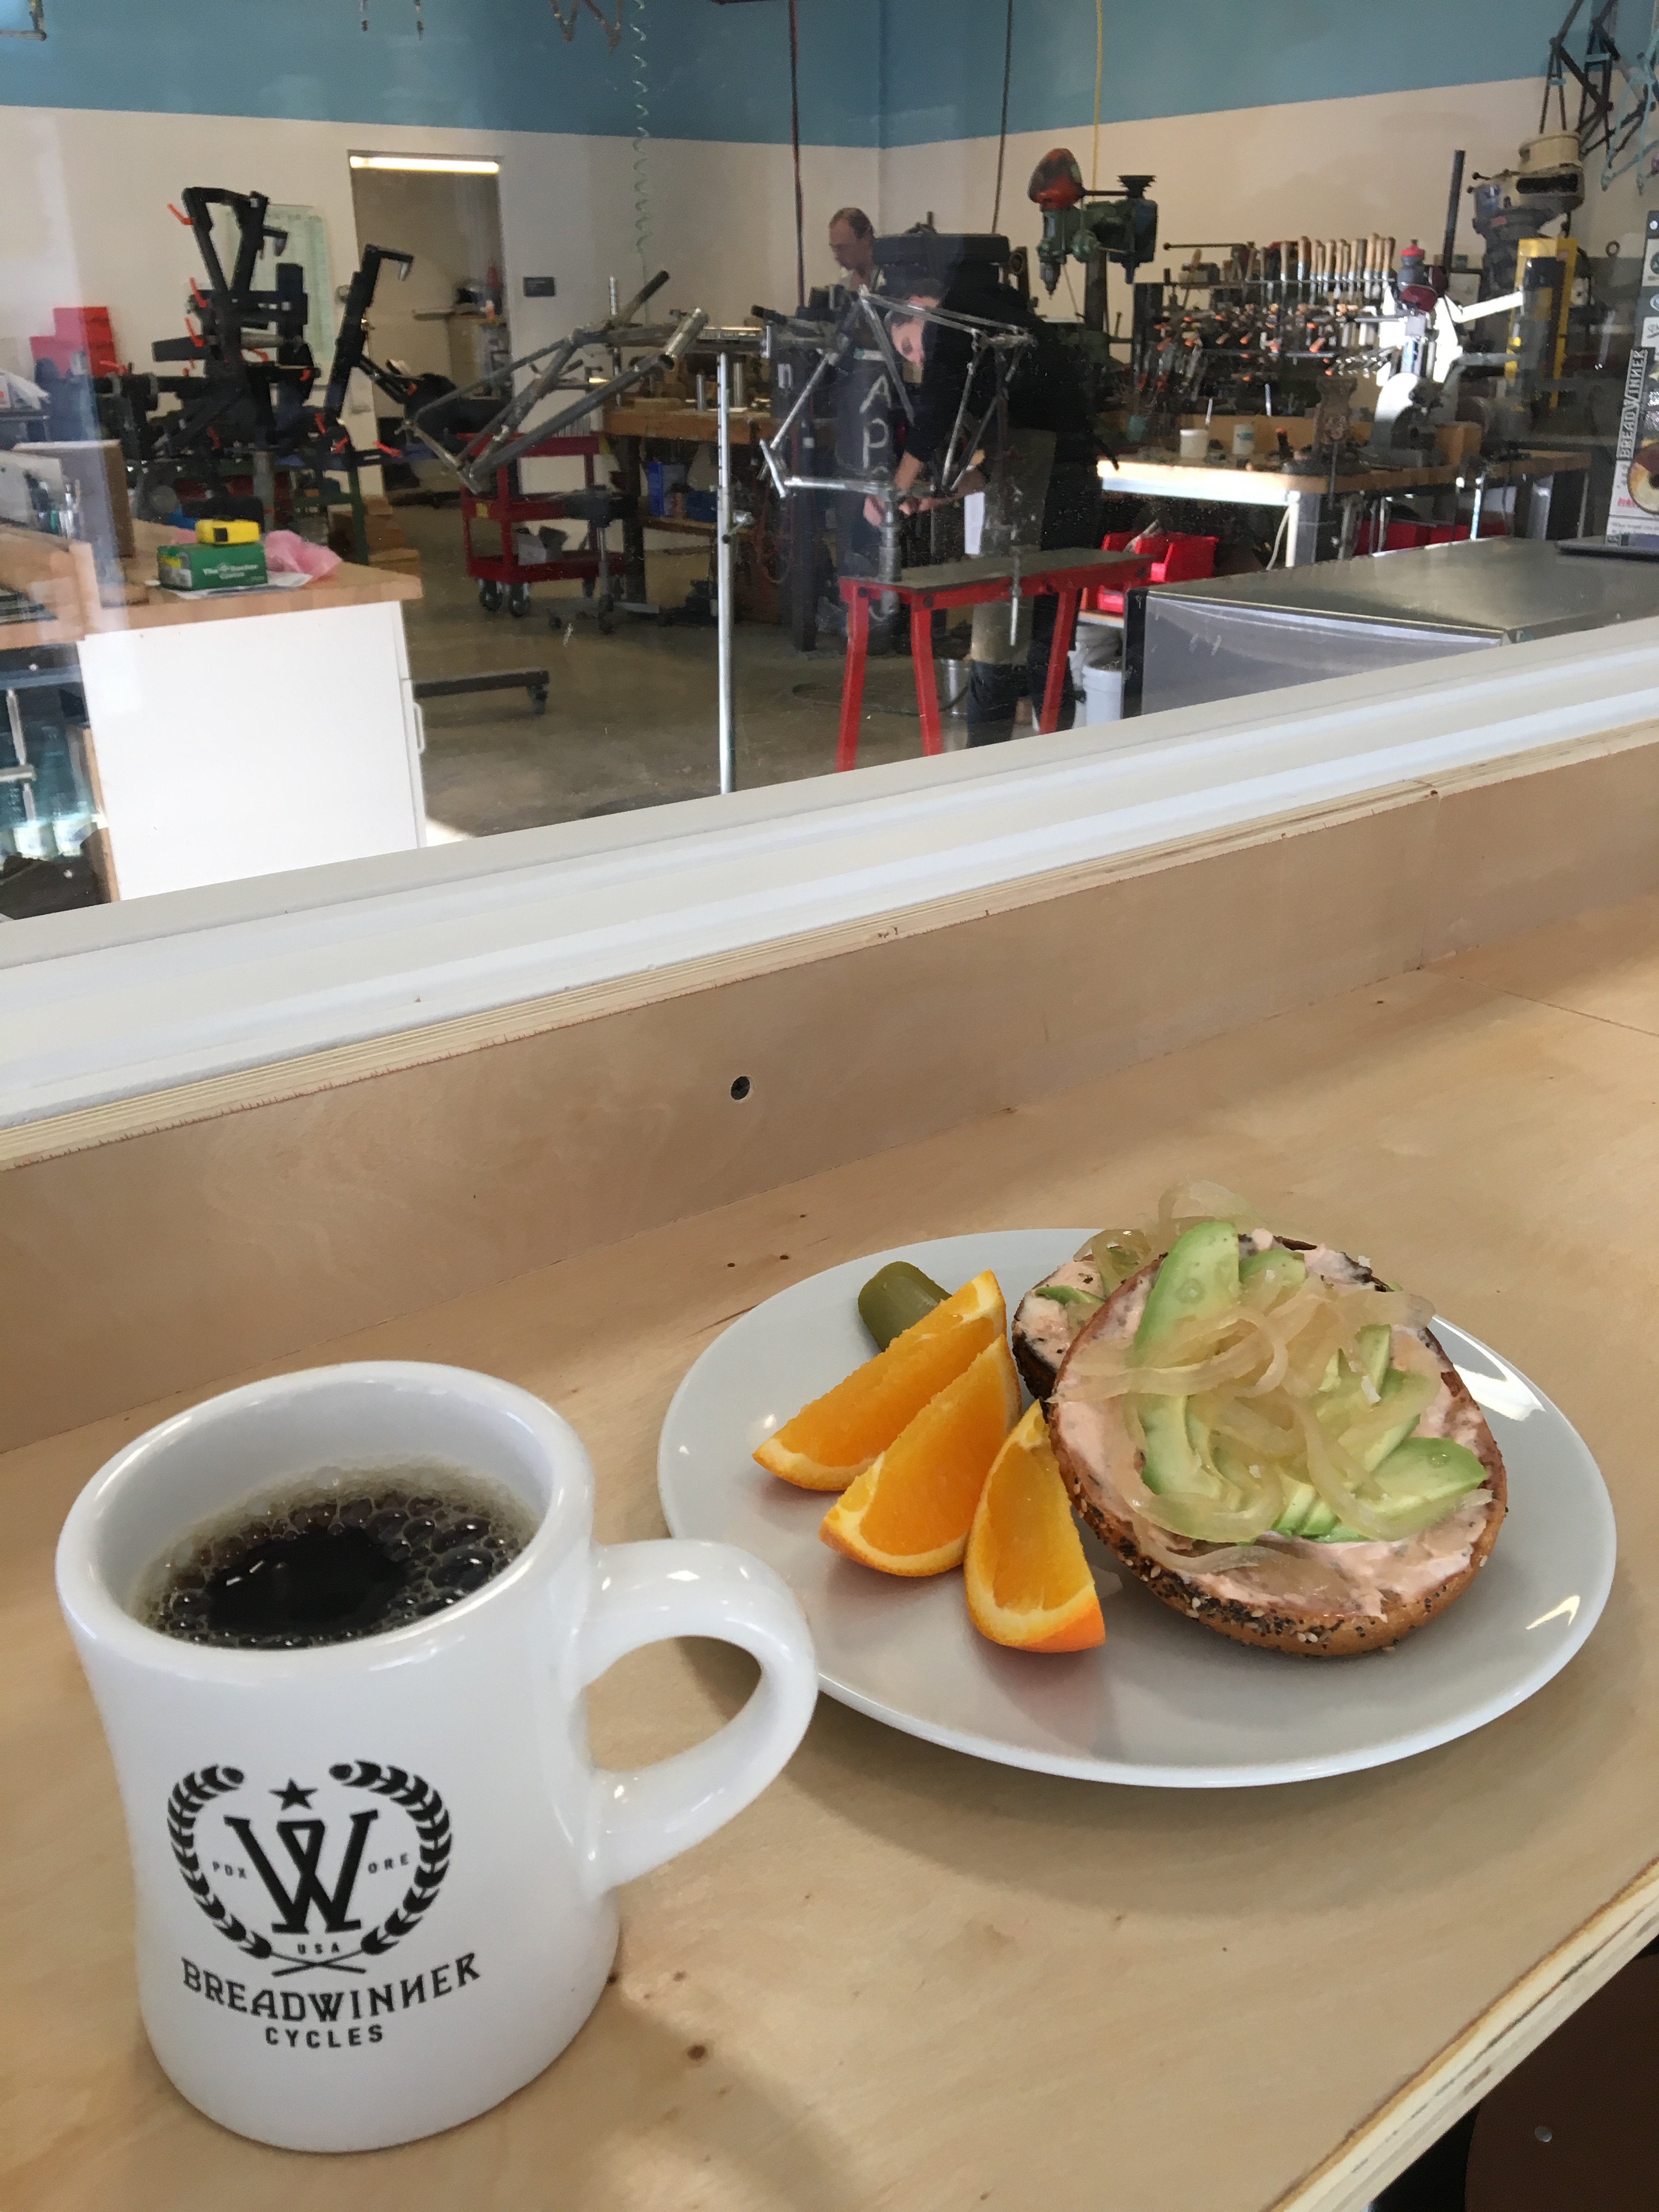 The cafe serves a customer Breadwinner blend from Water Avenue Roasters, as well as sandwiches, customizable bagels and toasts, other baked goods, beer and wine.